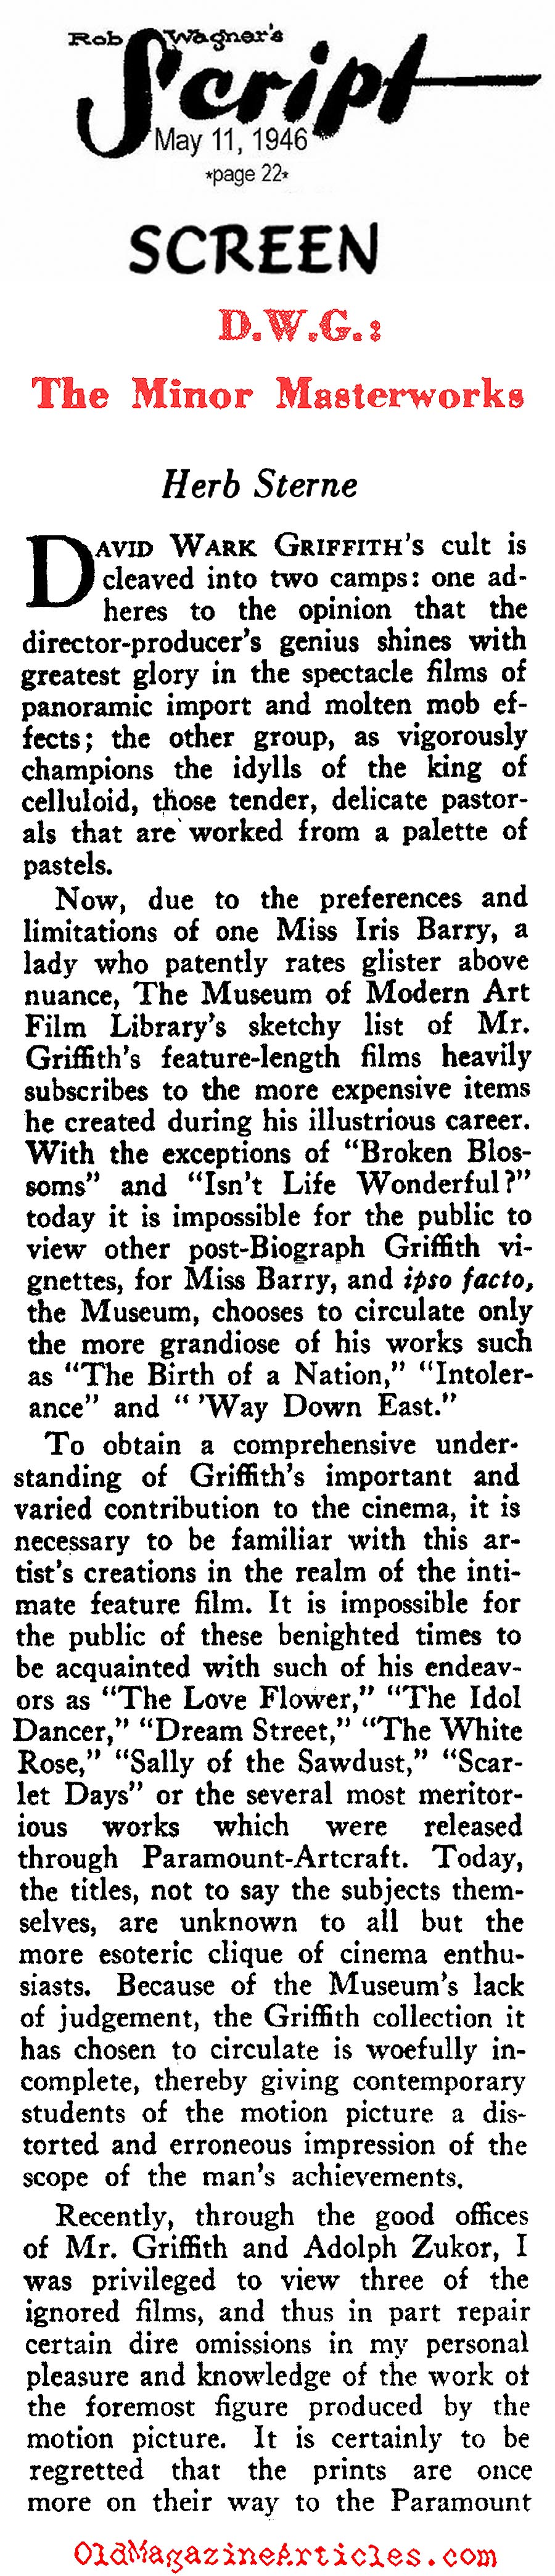 D.W. Griffith: His Minor Masterworks (Rob Wagner's Script, 1946)